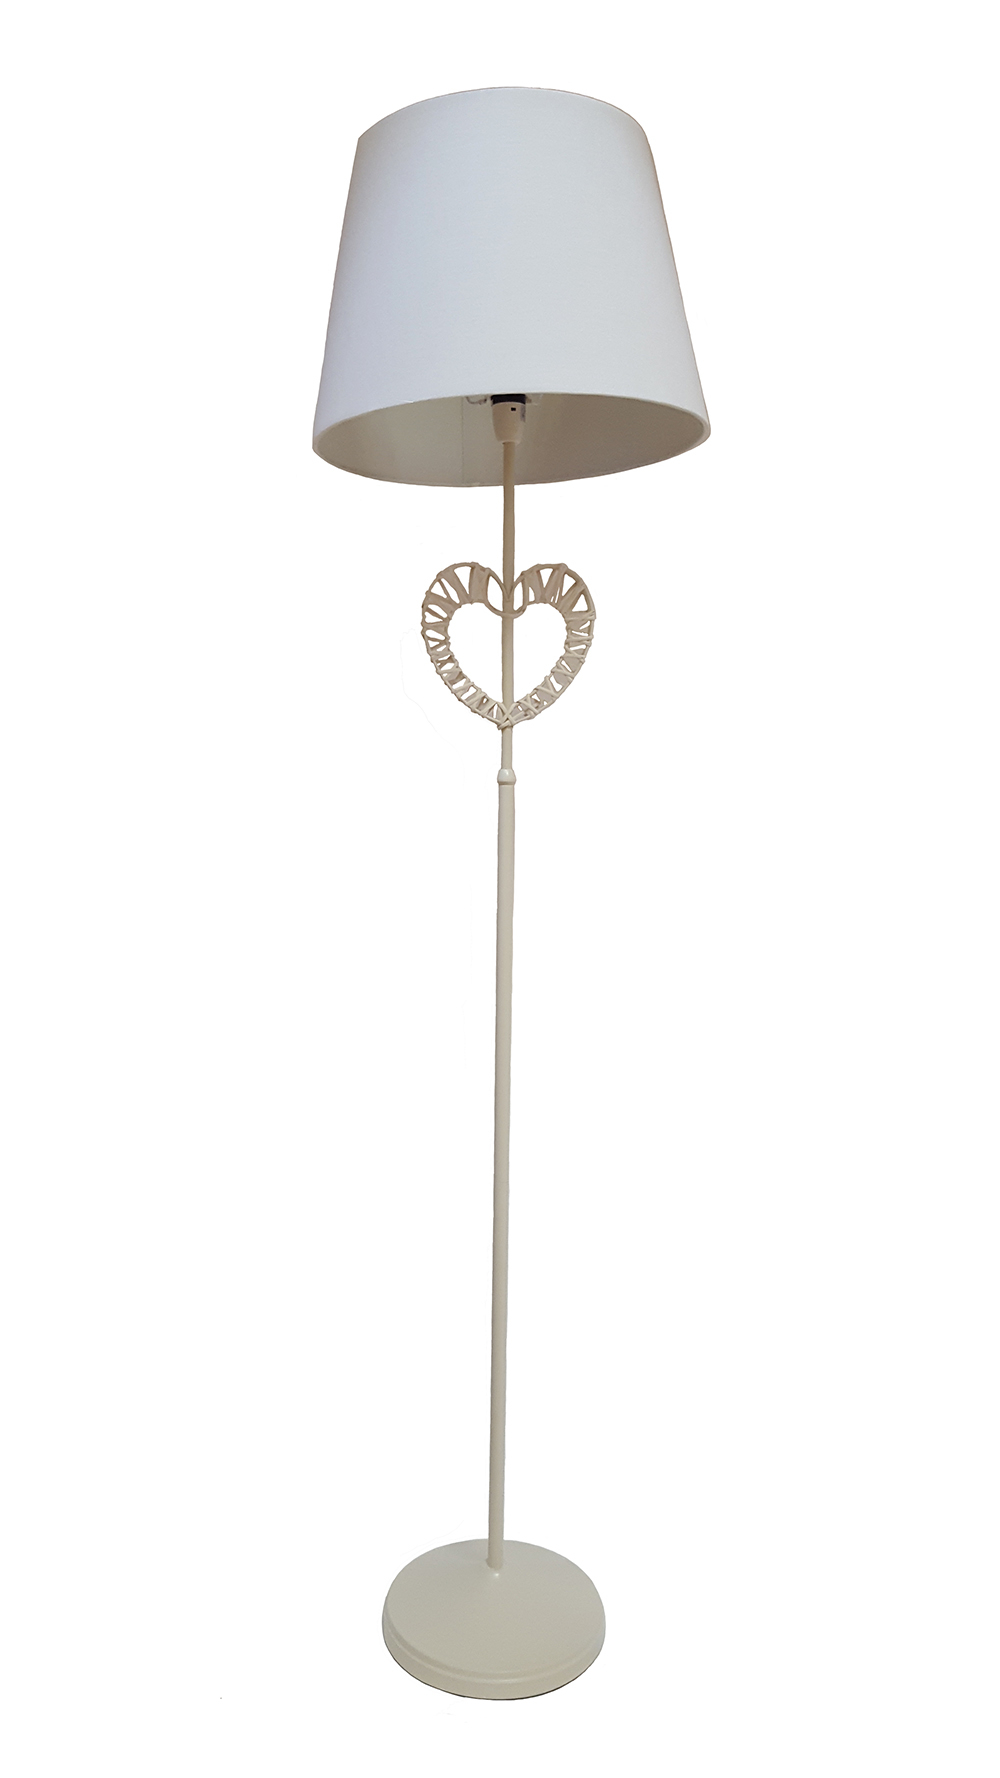 Details About Floor Lamp Pectus Vintage Wicker Heart Metal Stand With Ivory Fabric Shade for measurements 1000 X 1778